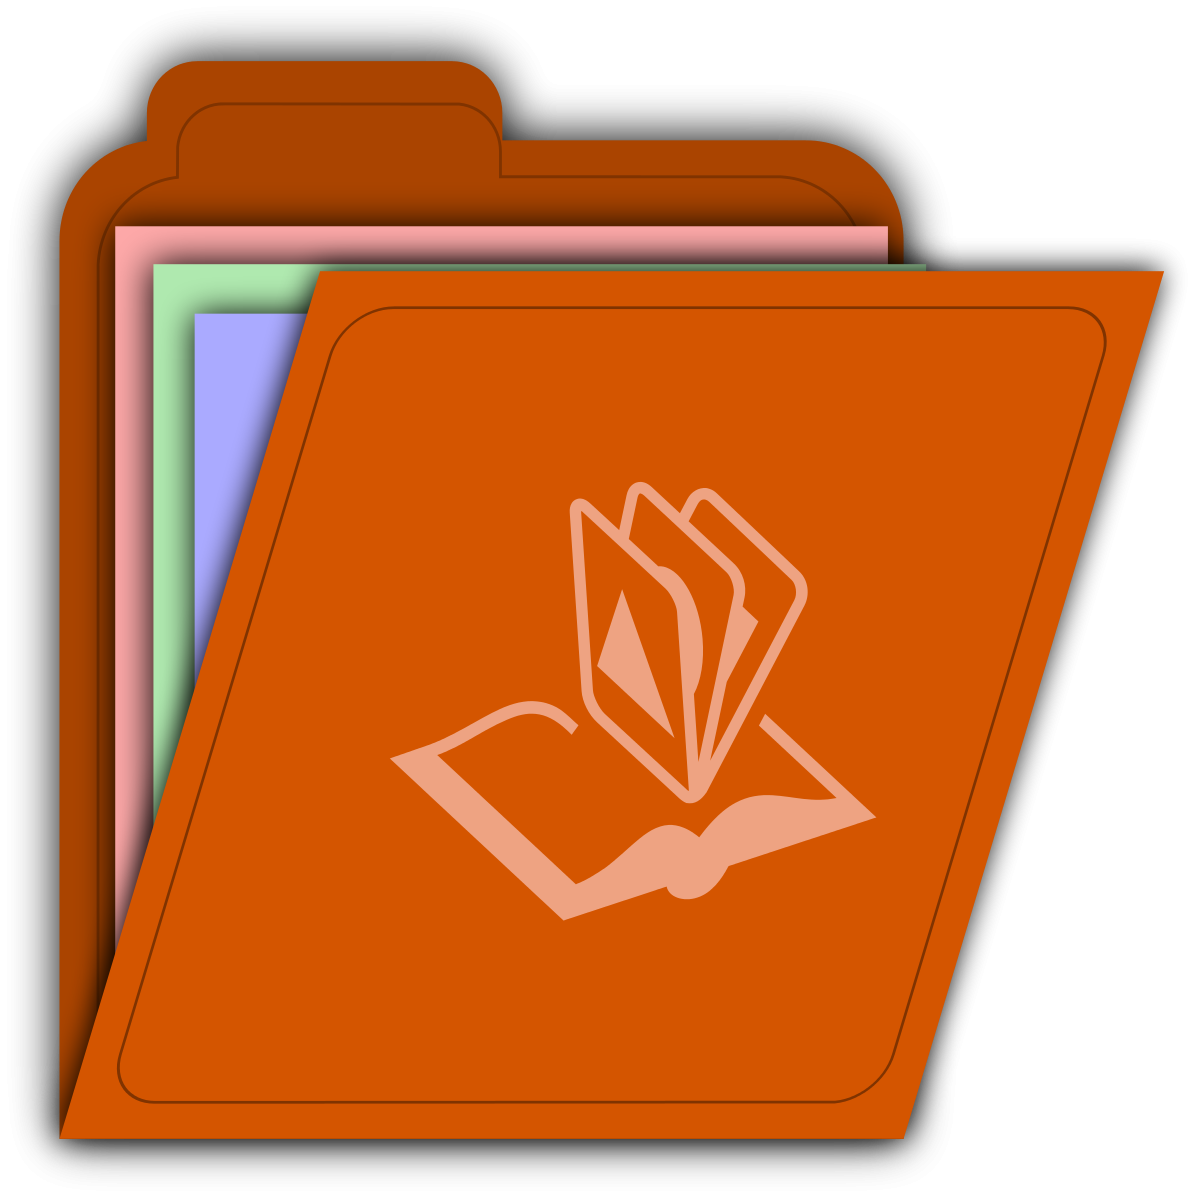 OCAL Favorite Folder Icon Clipart by gsagri04 : Icon Cliparts 